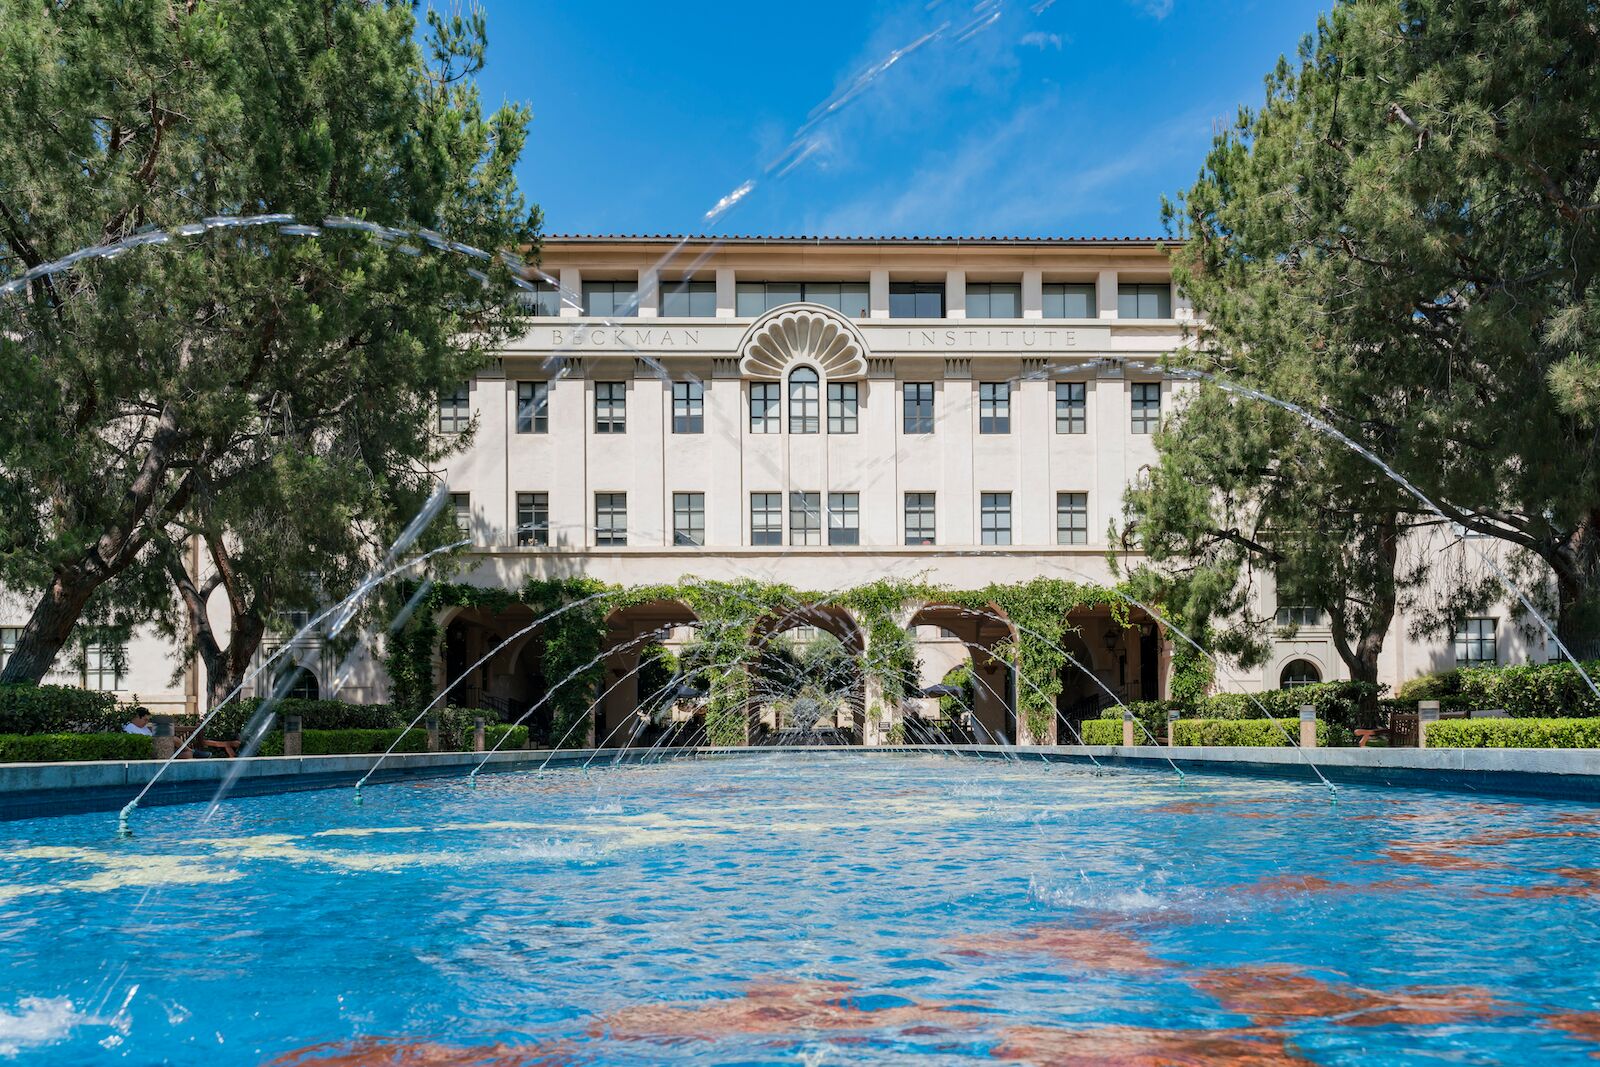 What to do in Pasadena: Architecture tour of CalTech